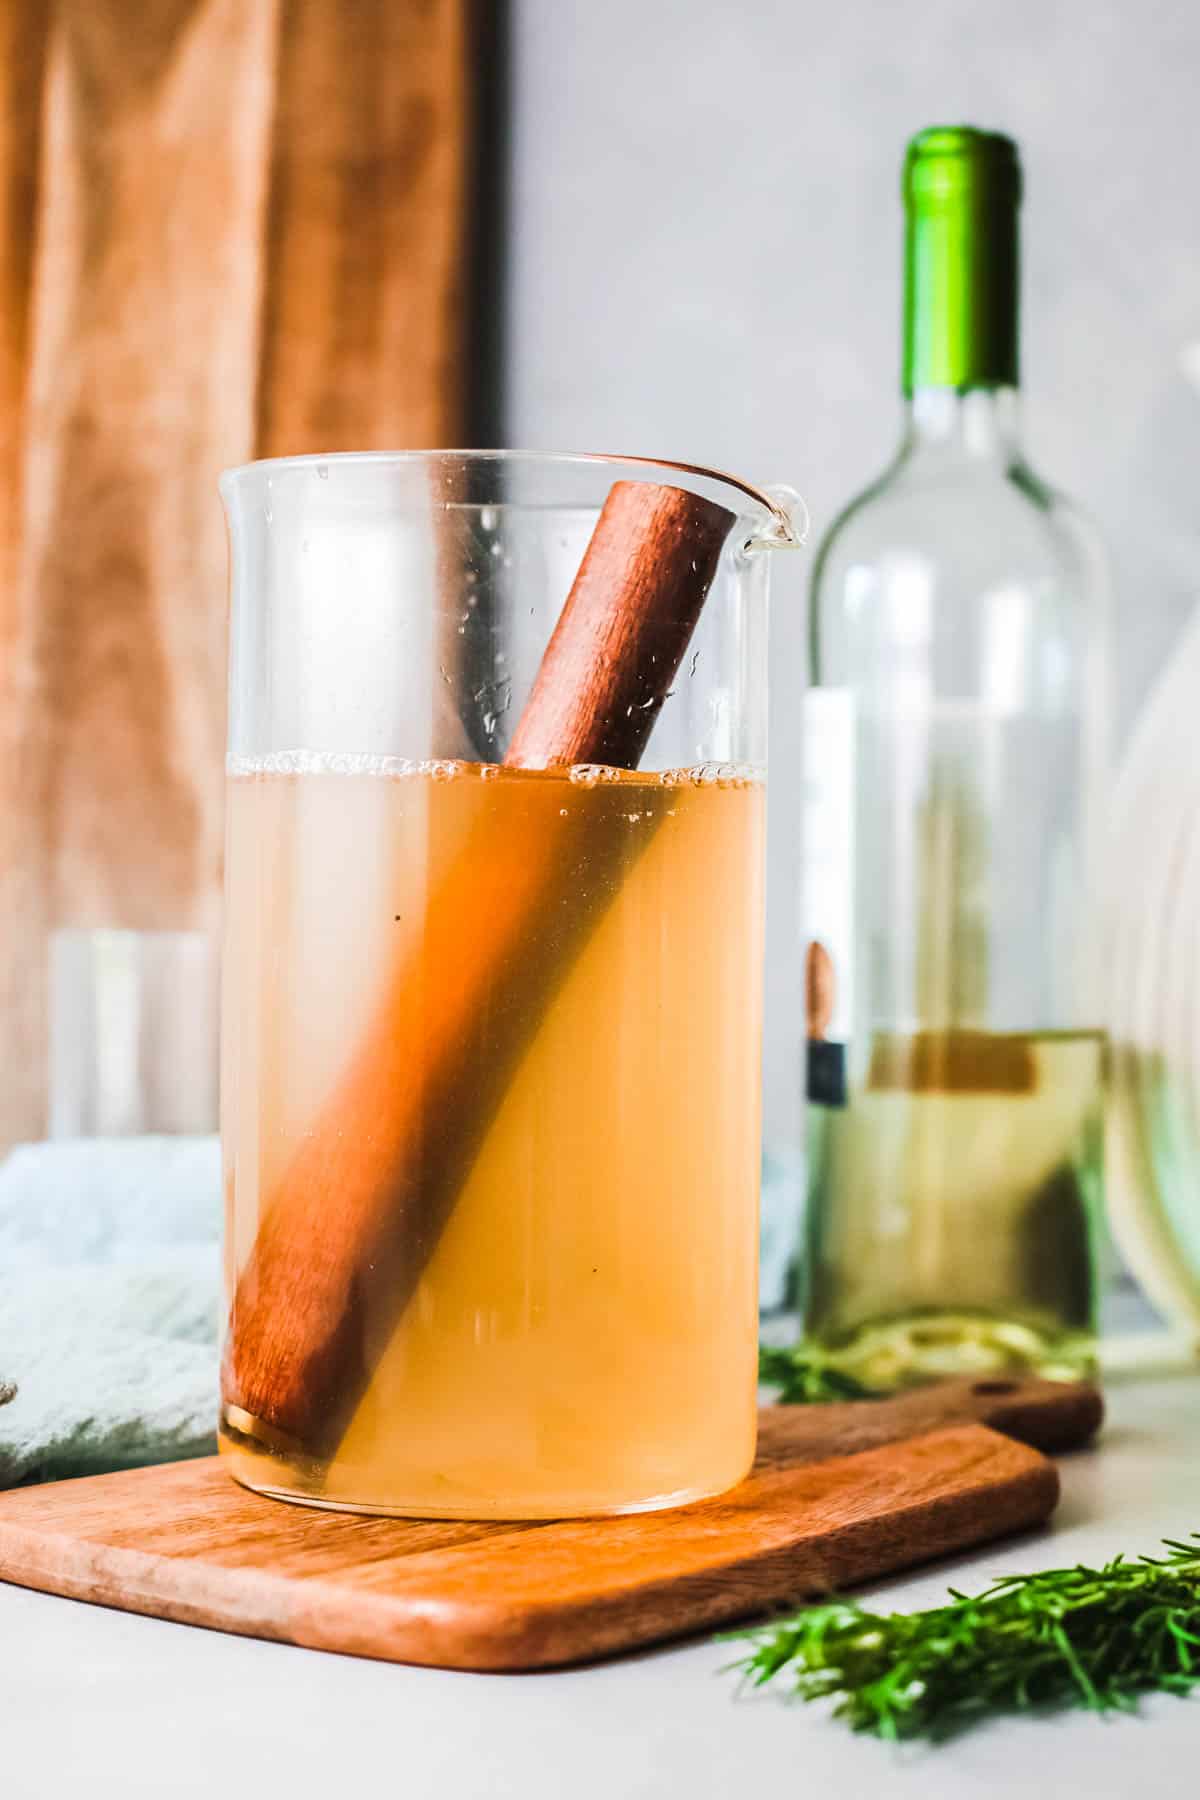 A glass cocktail pitcher with a wooden muddler in the liquid.